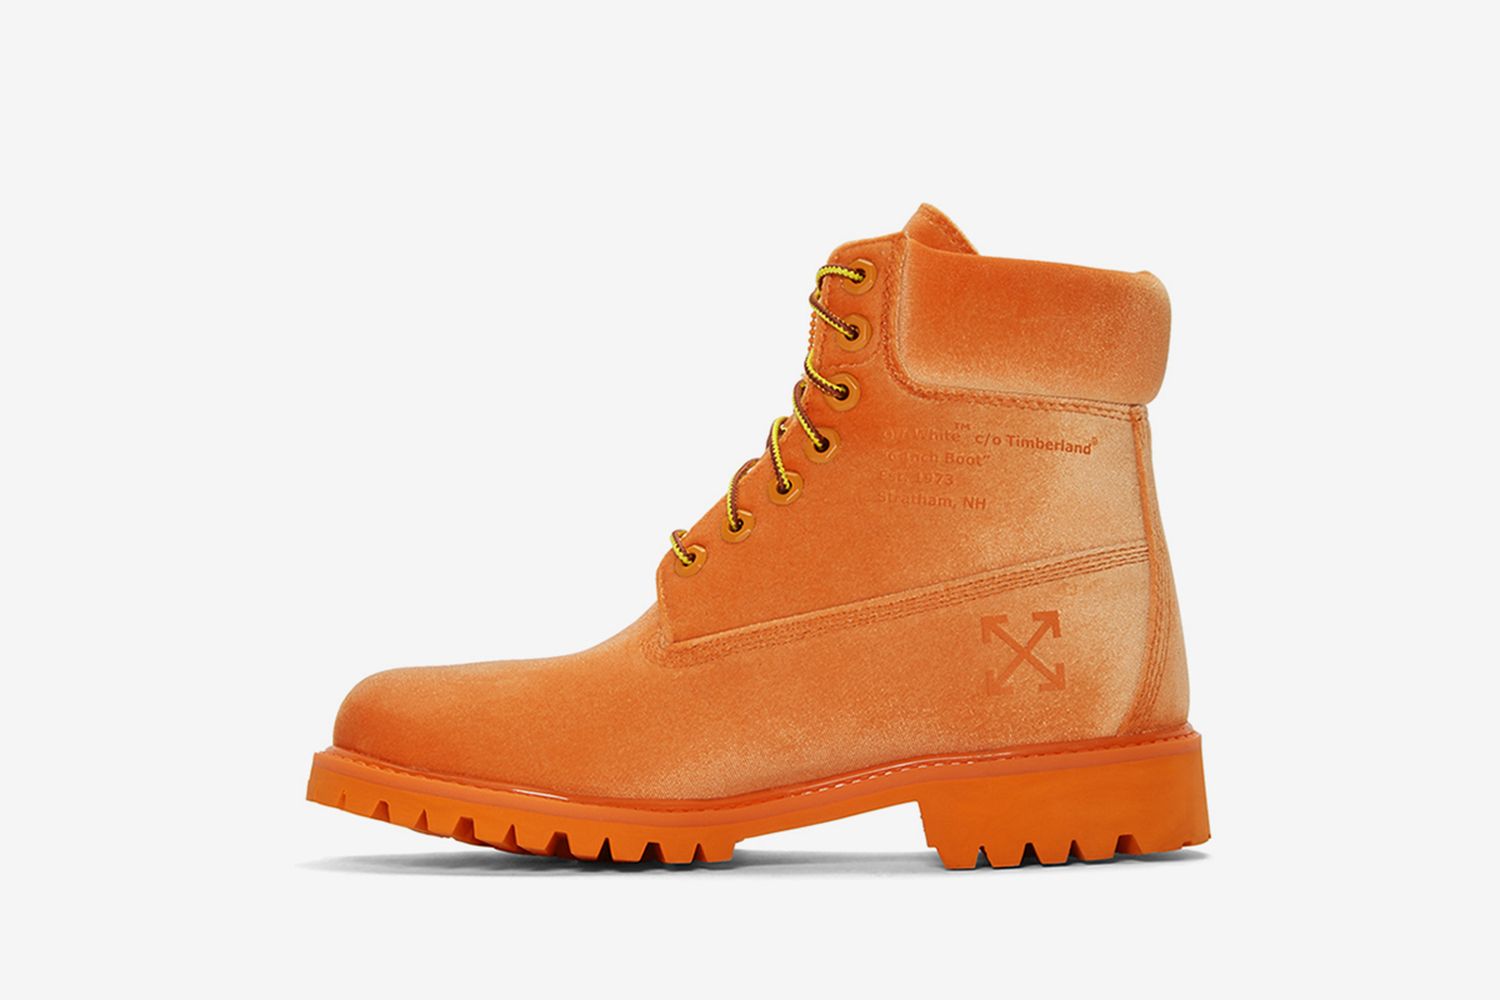 OFF–WHITE x Timberland 6 Inch Boot: Release Date, Price More